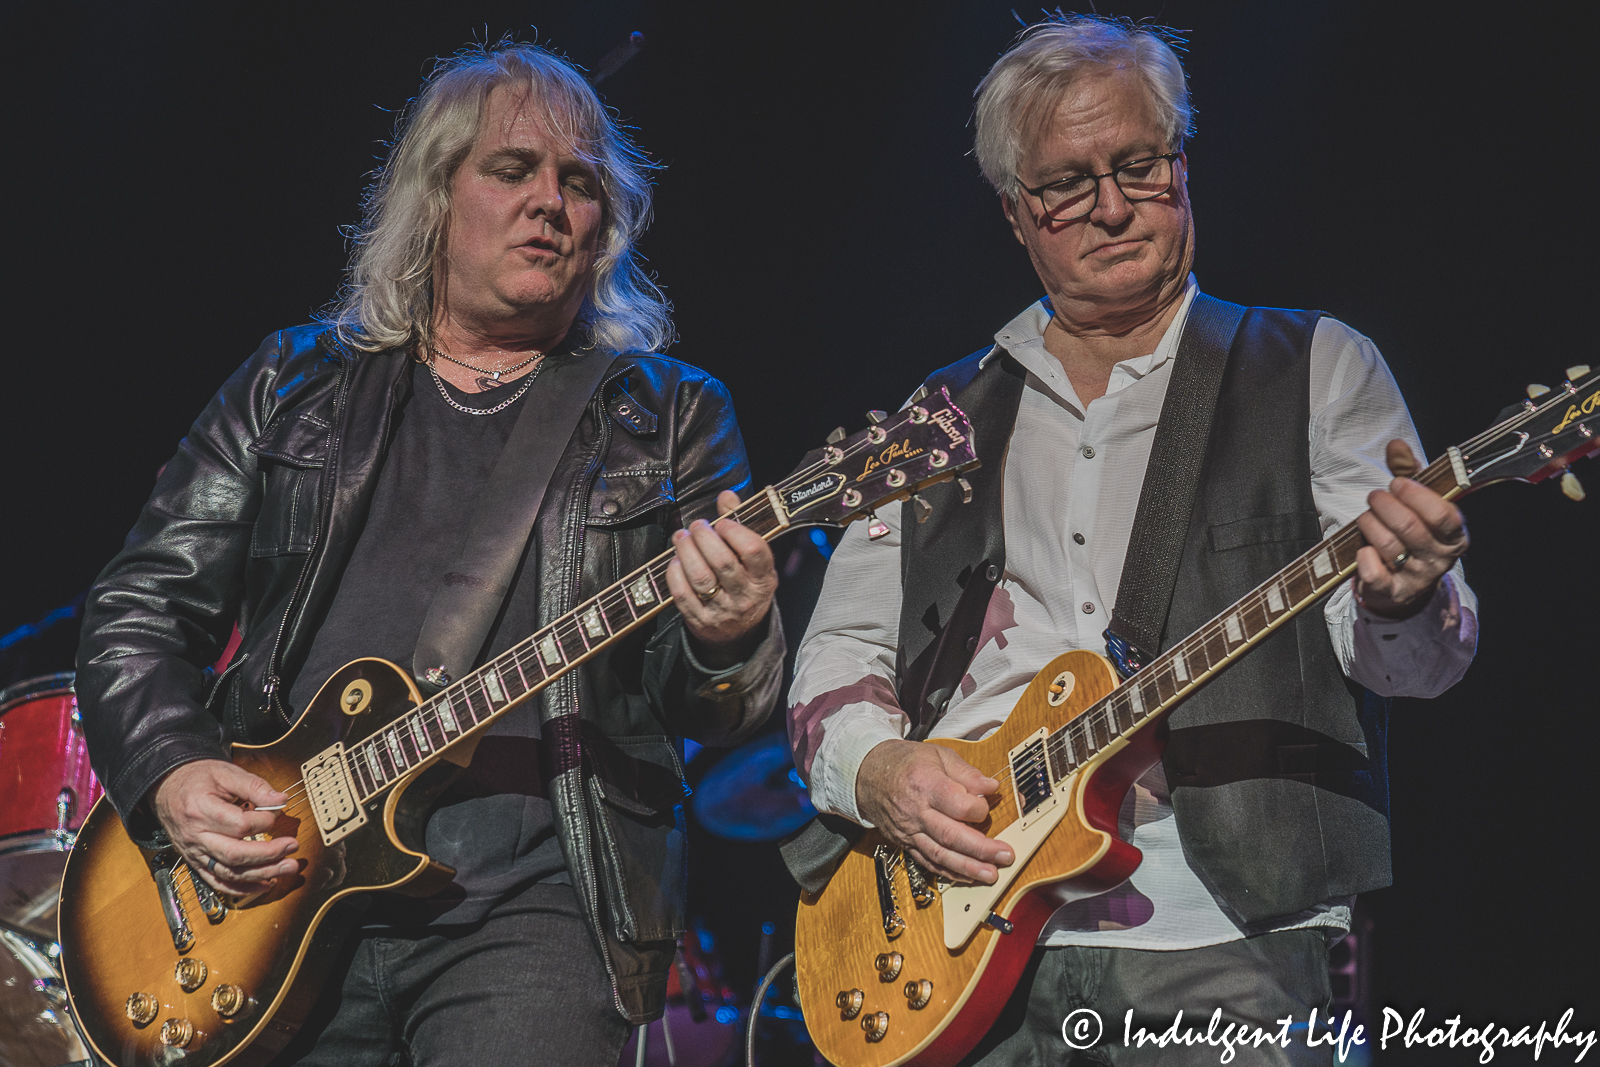 Missouri guitarists Rusty Crewse and Lane Turner performing together at Ameristar Casino's Star Pavilion in Kansas City, MO on April 9, 2022.